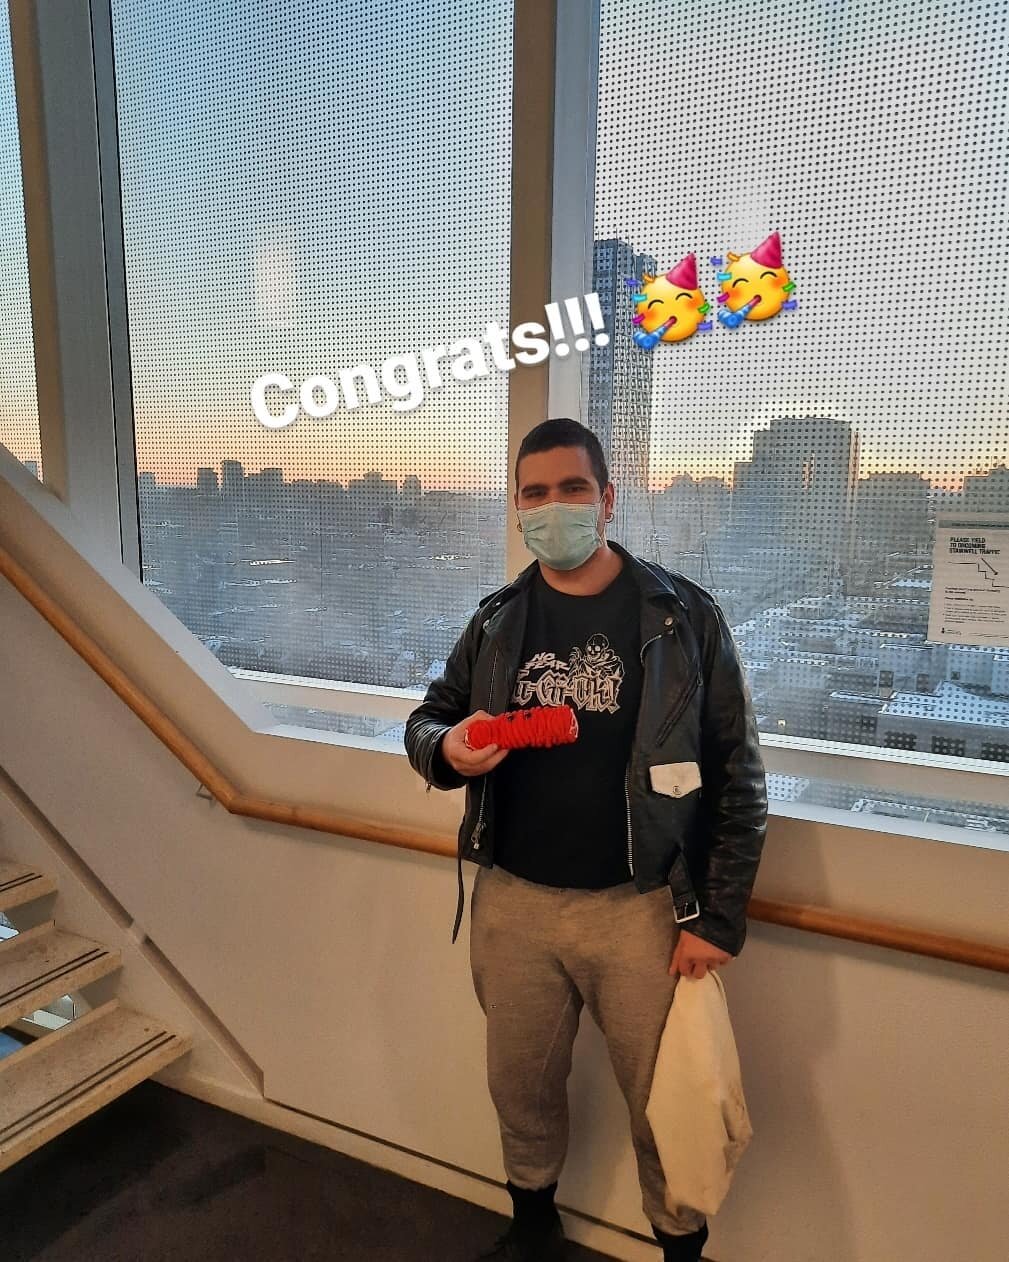 HUGE congrats to Matthew McFee for successfully defending his thesis last week!!🥳🙌 making him a MASc. Yayy!!
&bull;
&bull;
&bull;
&bull;
&bull;
&bull;
#scientist #science #uoft #terrencedonnelly #bme #toronto #graduate